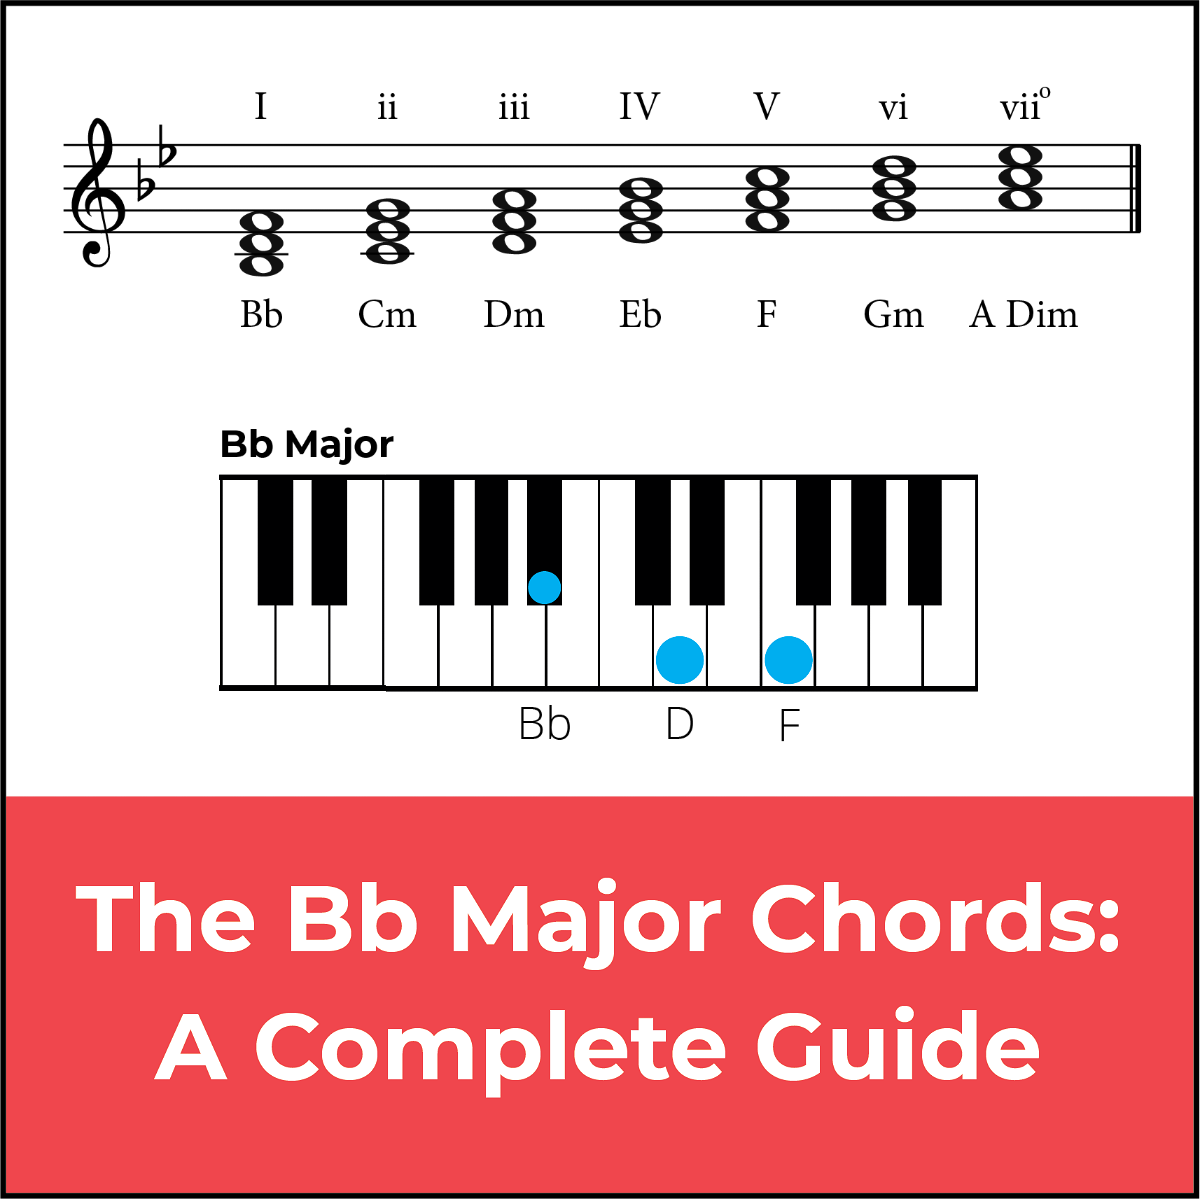 Chords In B Flat Major A Music Theory Guide